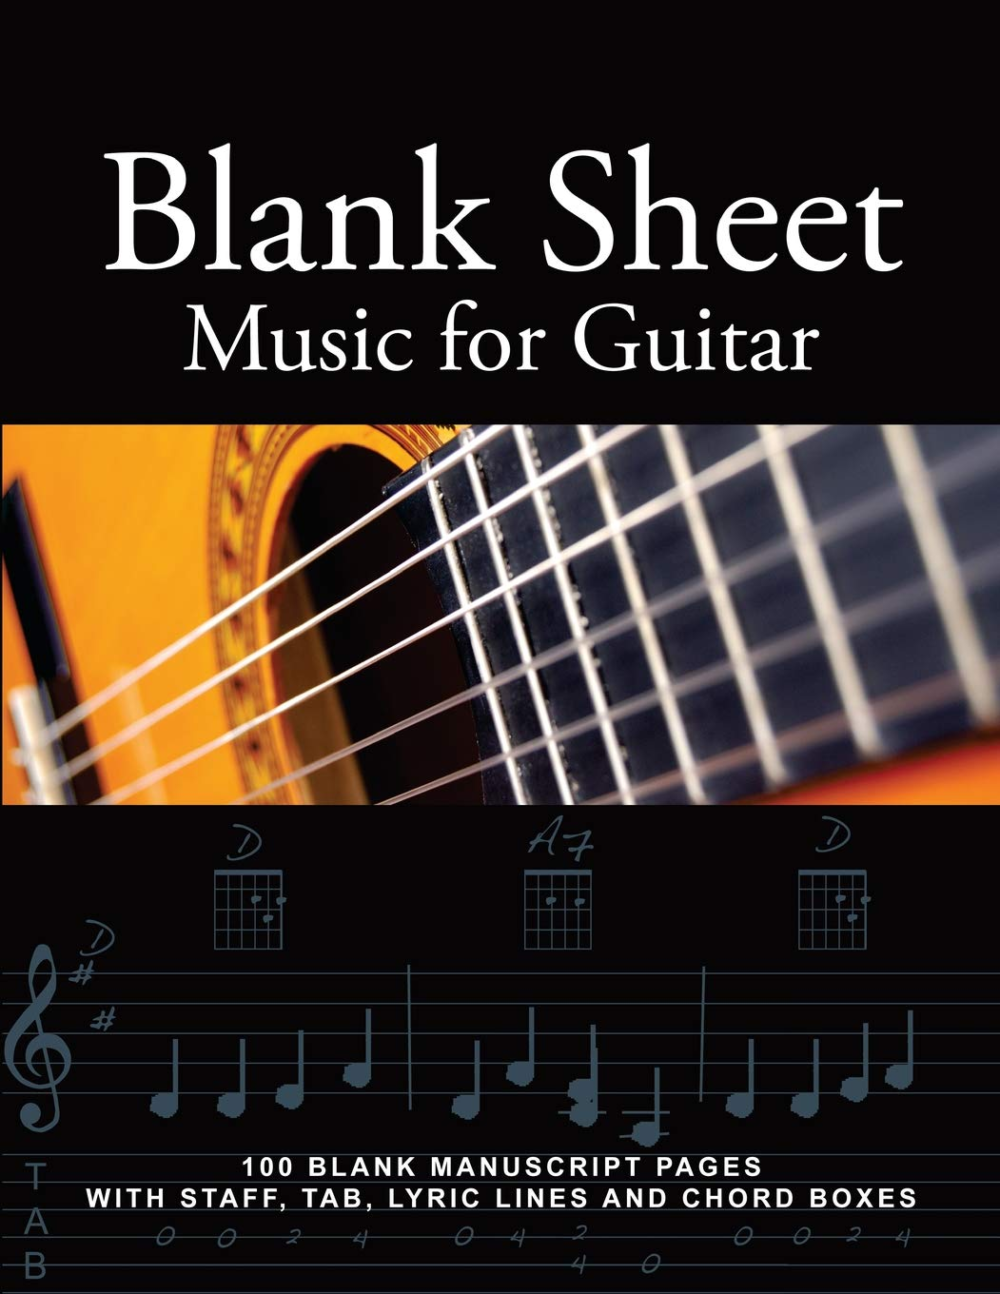 blank sheet music for guitar: 100 blank manuscript pages with staff, tab, lyric lines and chord boxes